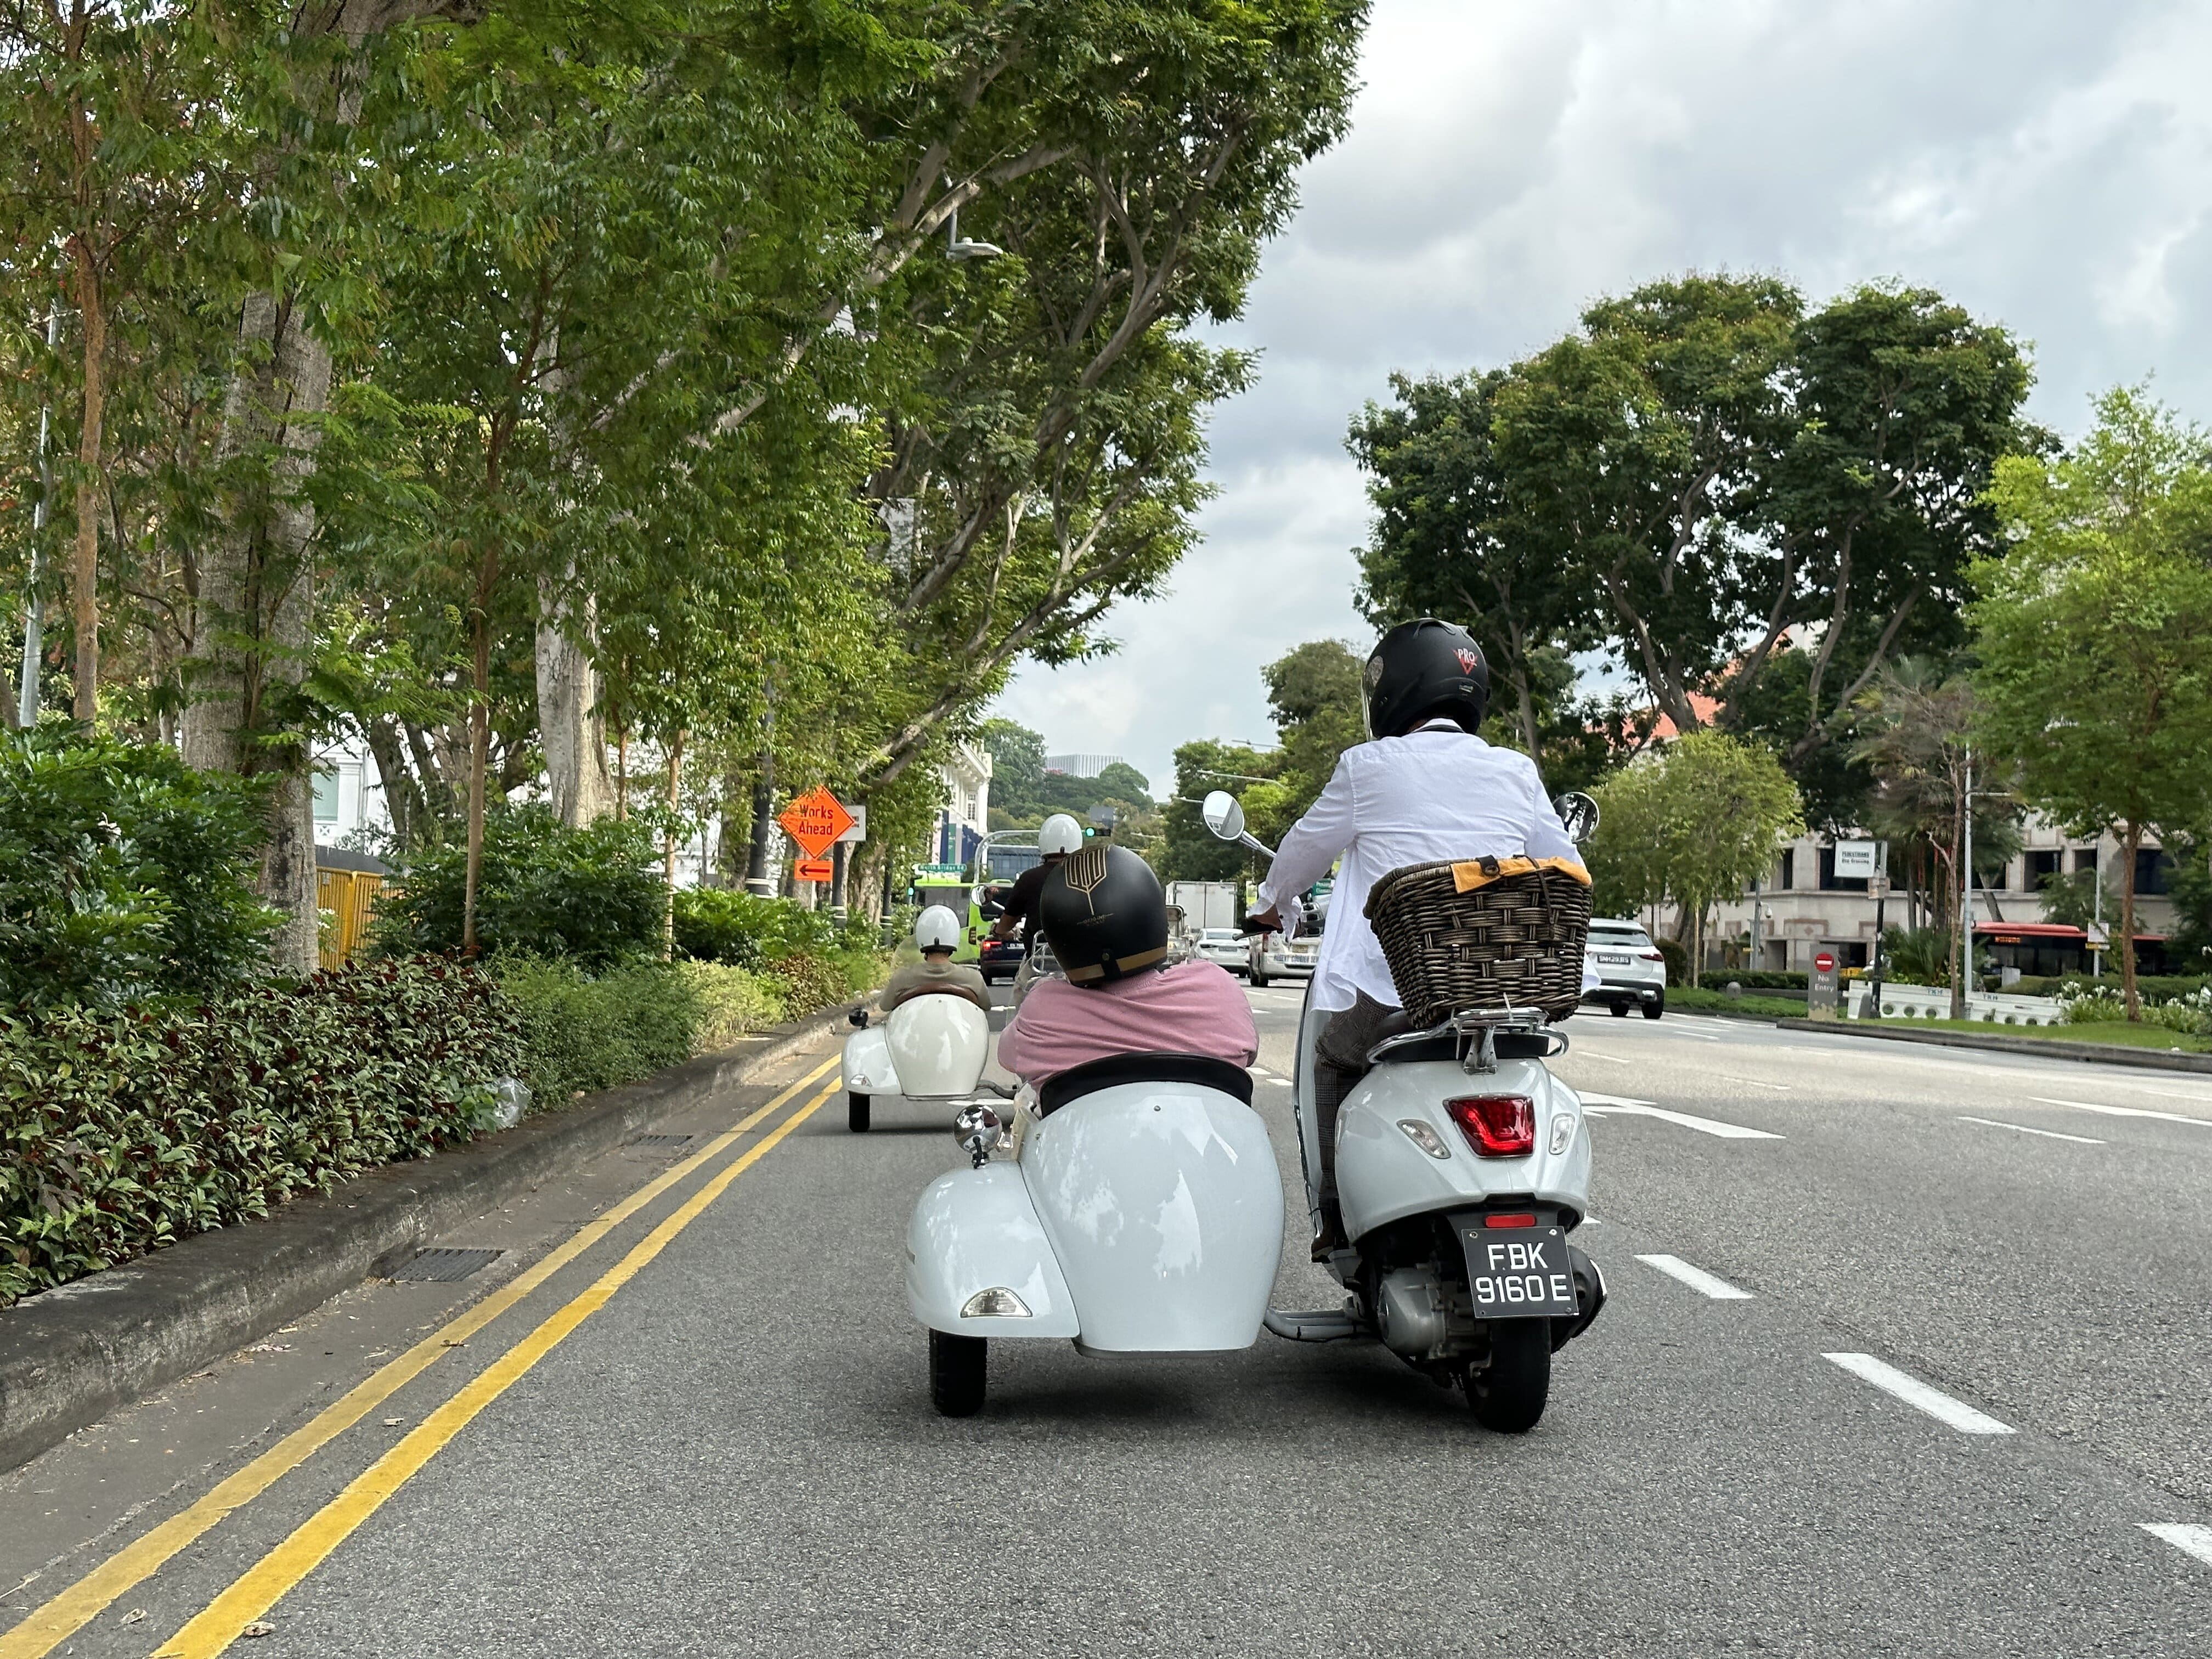 Wide shot of a Vespa sidecar in action on the street